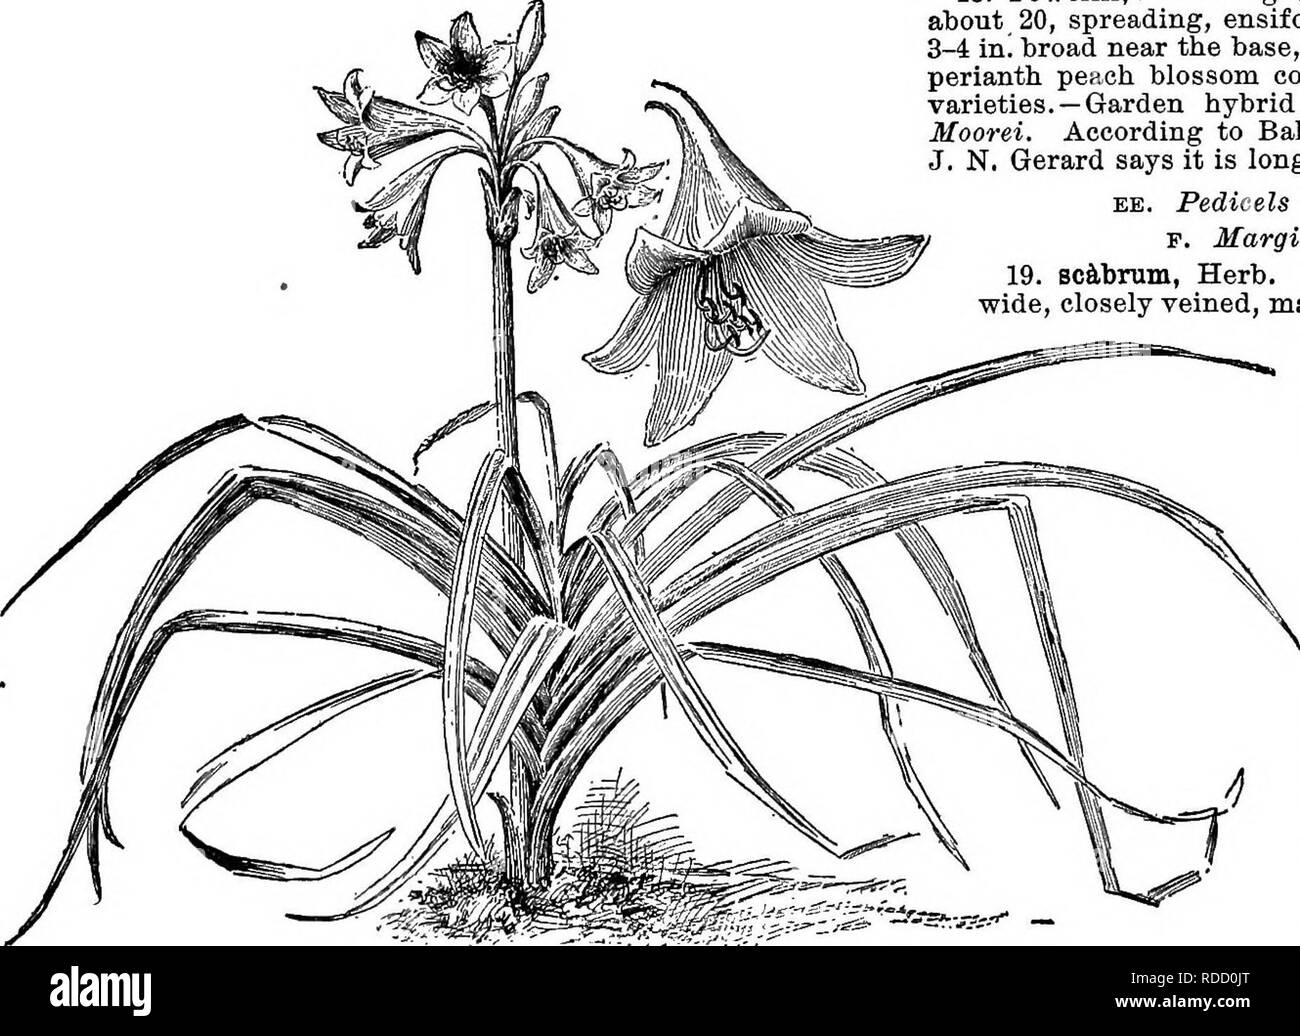 . Cyclopedia of American horticulture, comprising suggestions for cultivation of horticultural plants, descriptions of the species of fruits, vegetables, flowers, and ornamental plants sold in the United States and Canada, together with geographical and biographical sketches. Gardening. CRINUM species from Zanzibar, probably not known outside of one or two botanical gardens. 13. variAbile, Herb. {G. crassifdlium, Herb.). Bulb ovoid, 3-4 in. thick : Ivs. lM-2 ft. long, 2 in. wide, weak: fls. 10-12 ; perianth flushed red outside : filaments red. Cape Colony.—A rare species. .00. Fls. fewer, usua Stock Photo